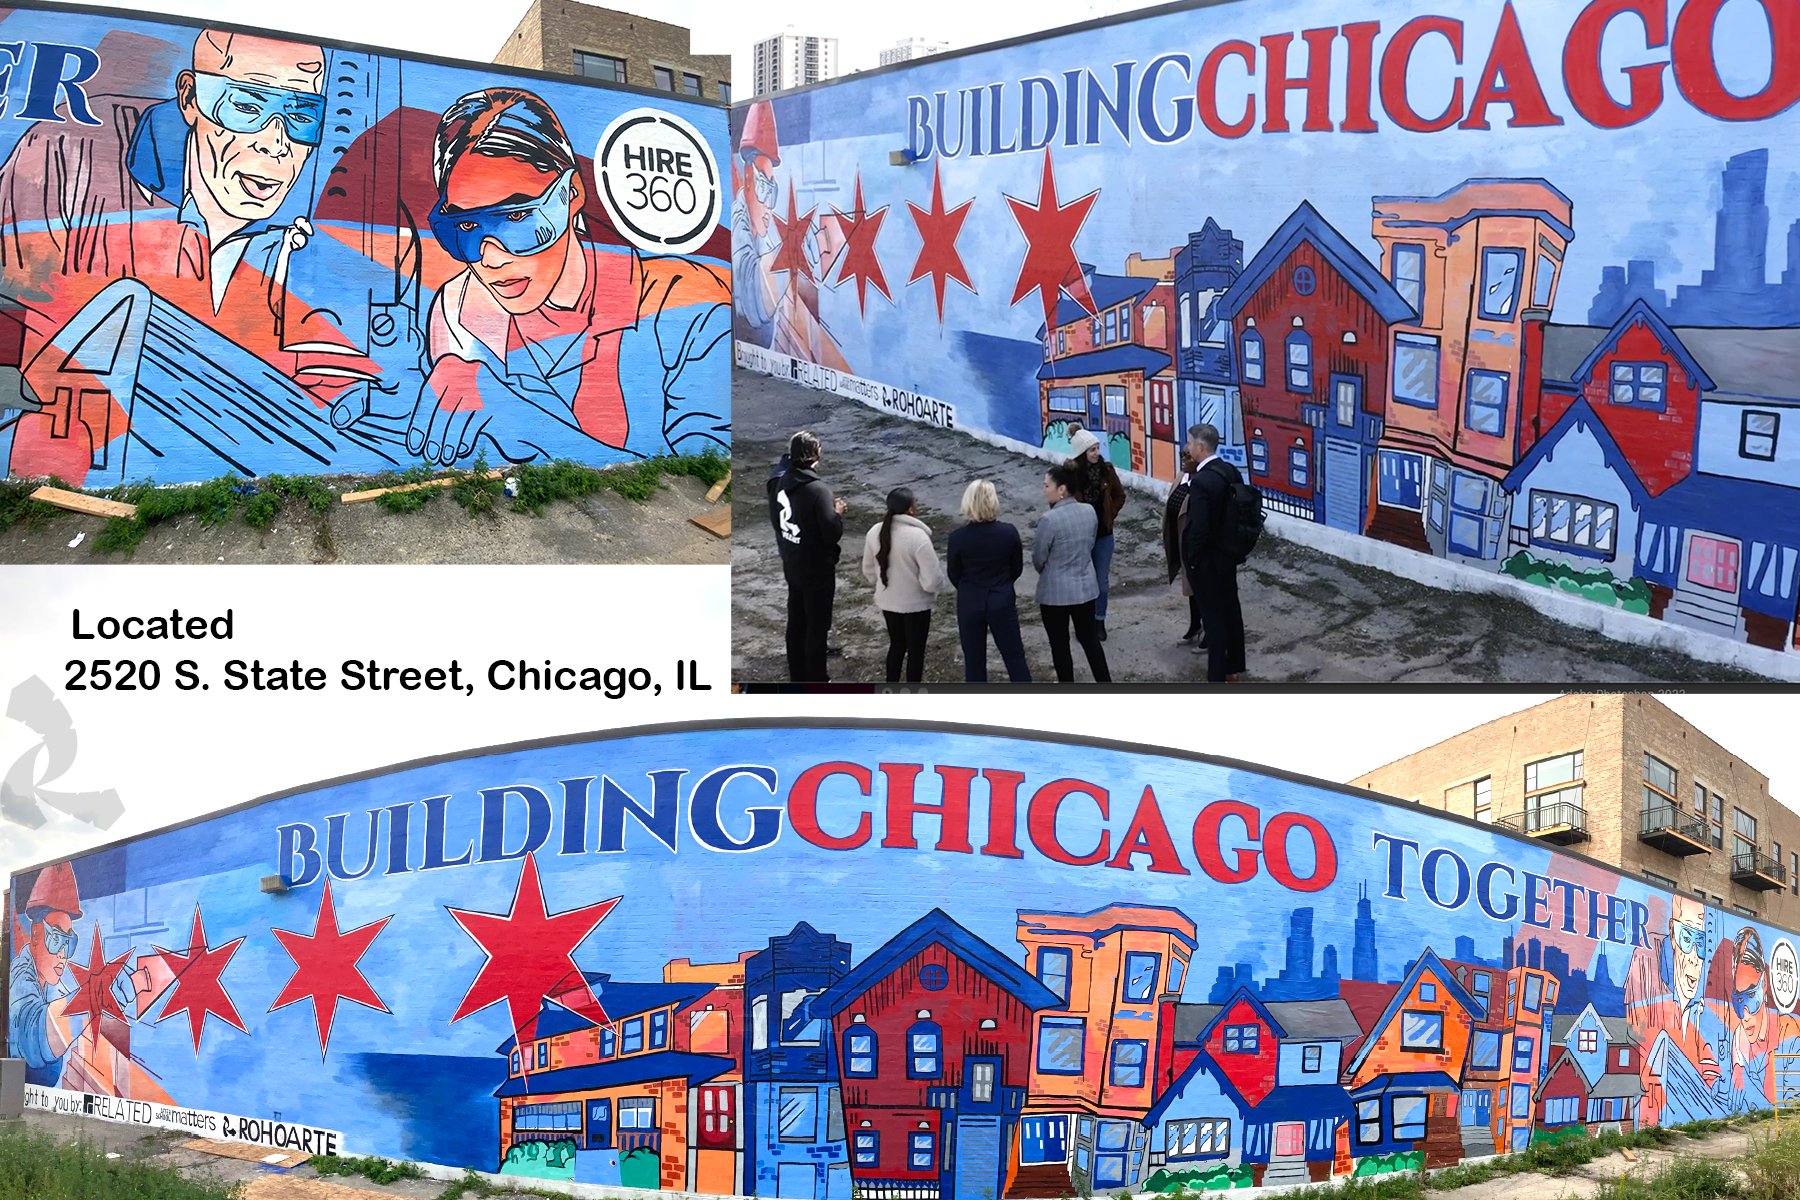 Building Chicago Together Mural